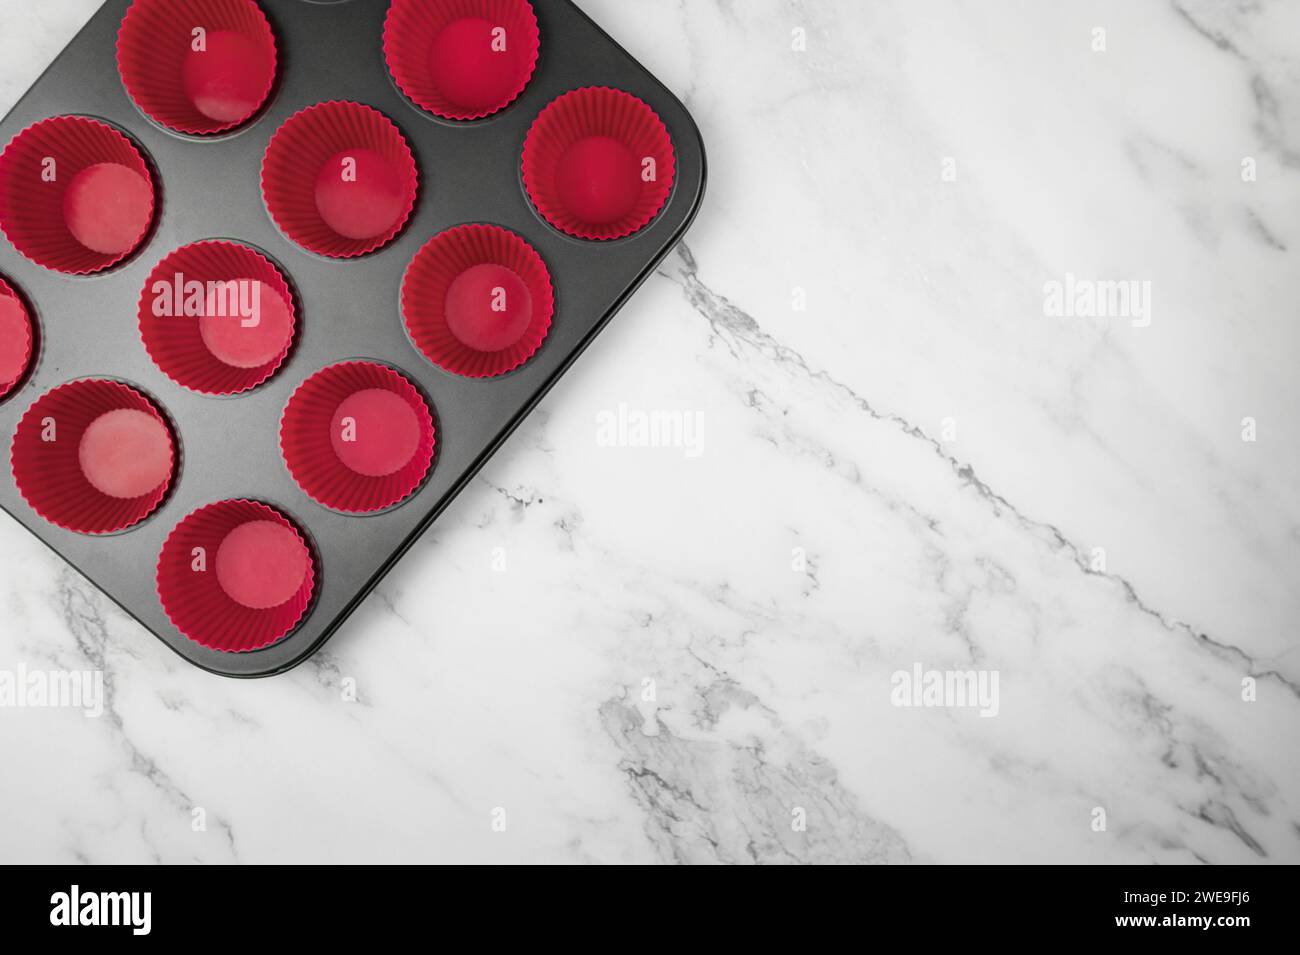 Top view of cupcake pan and silicone cases on white marble background. Muffins and cupcakes cooking, flat lay, copy space. Stock Photo